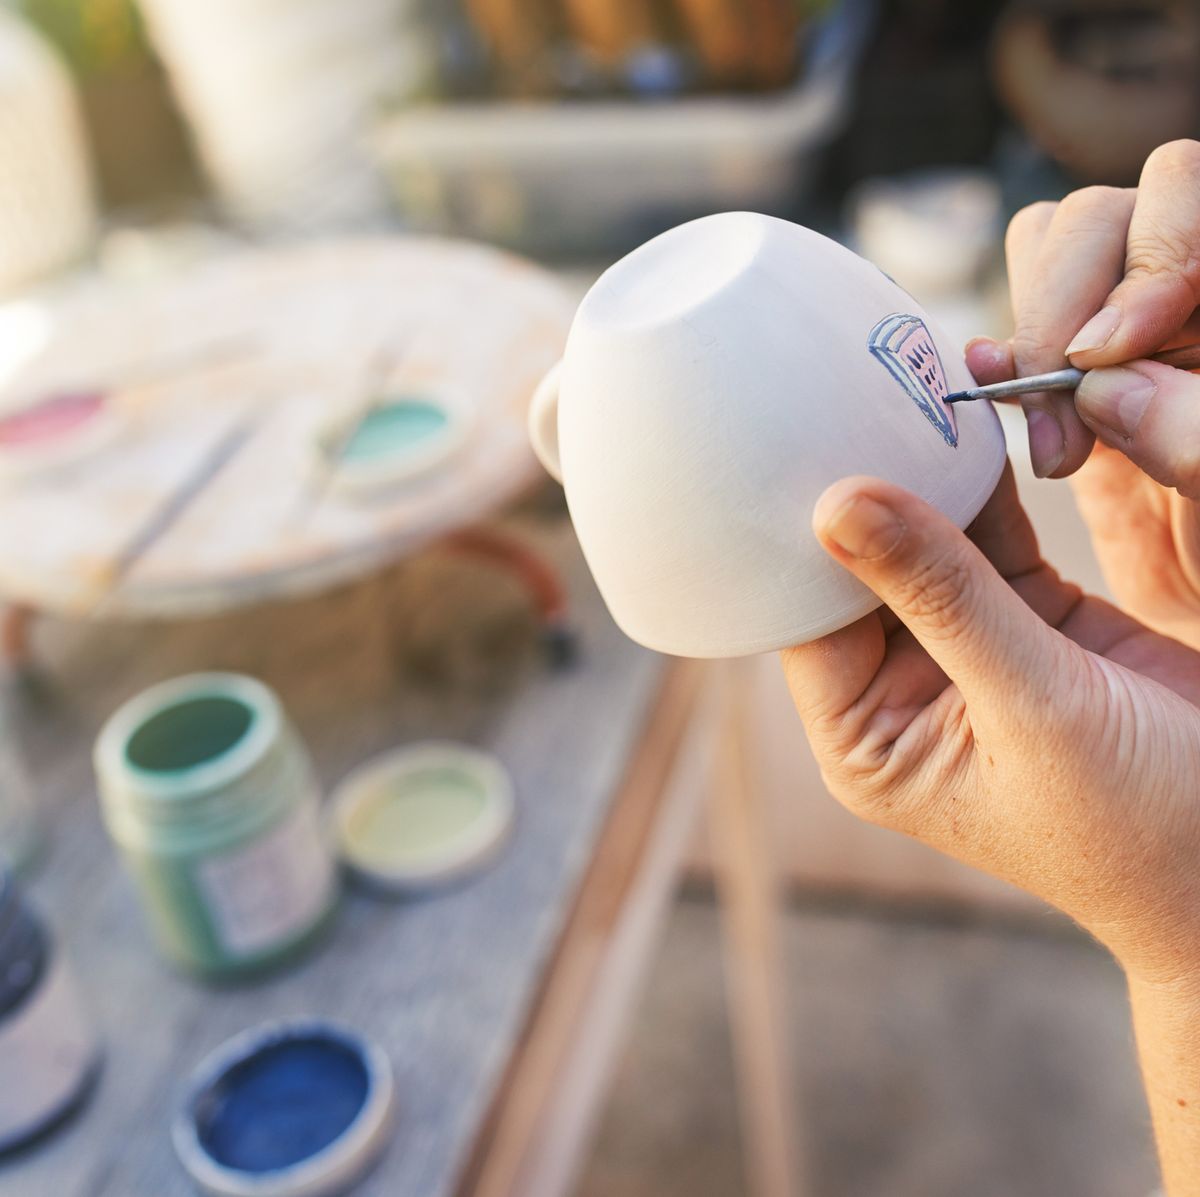 Pottery kits: Best kits to try at home